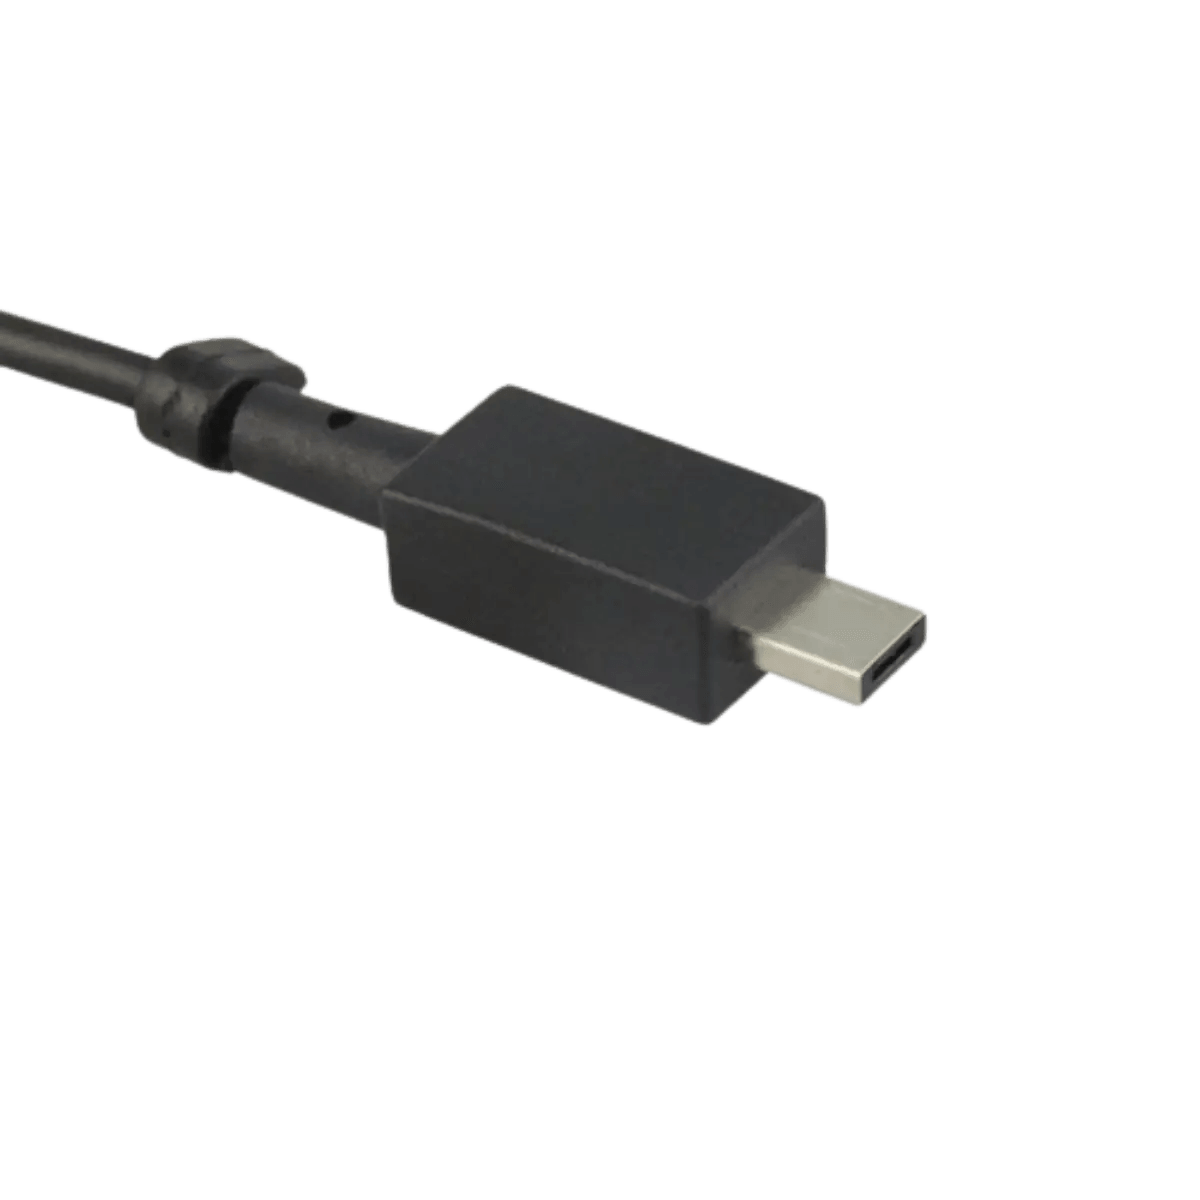 Chargeur pour Asus Eeebook X205 19V 34W 1.75A